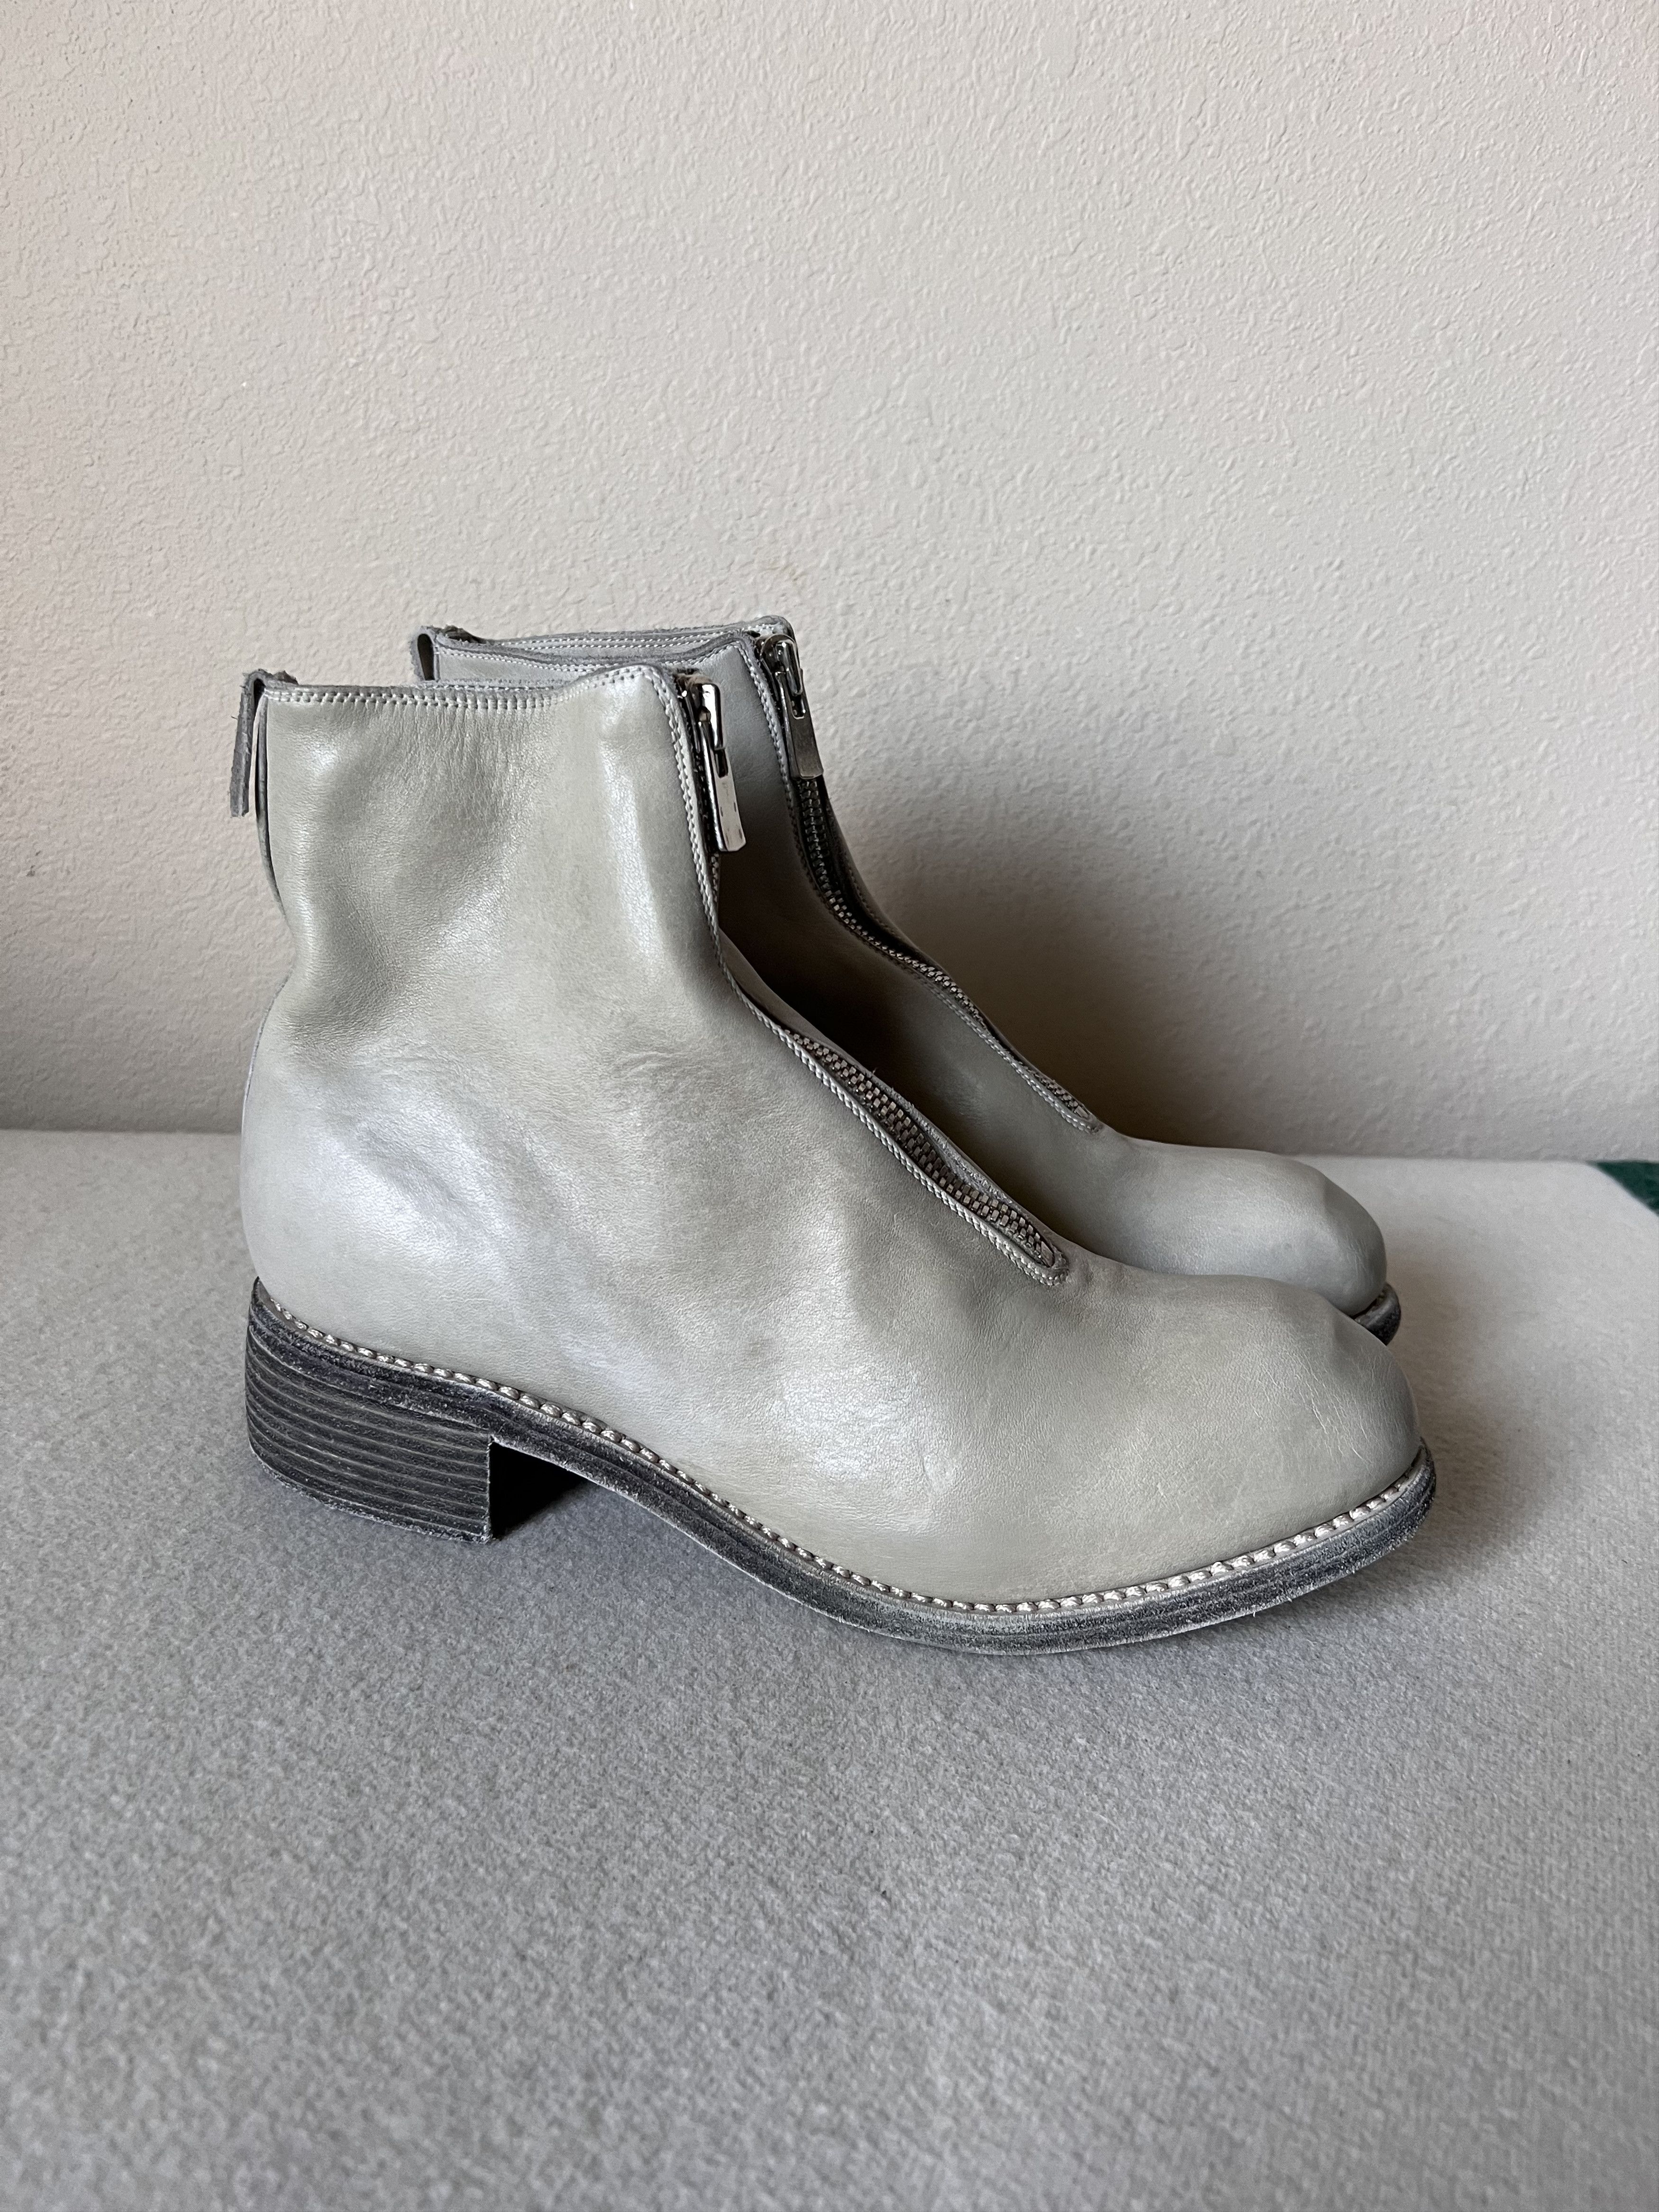 Guidi Guidi PL1 Full Grain Horse Leather Front Zip Boots | Grailed